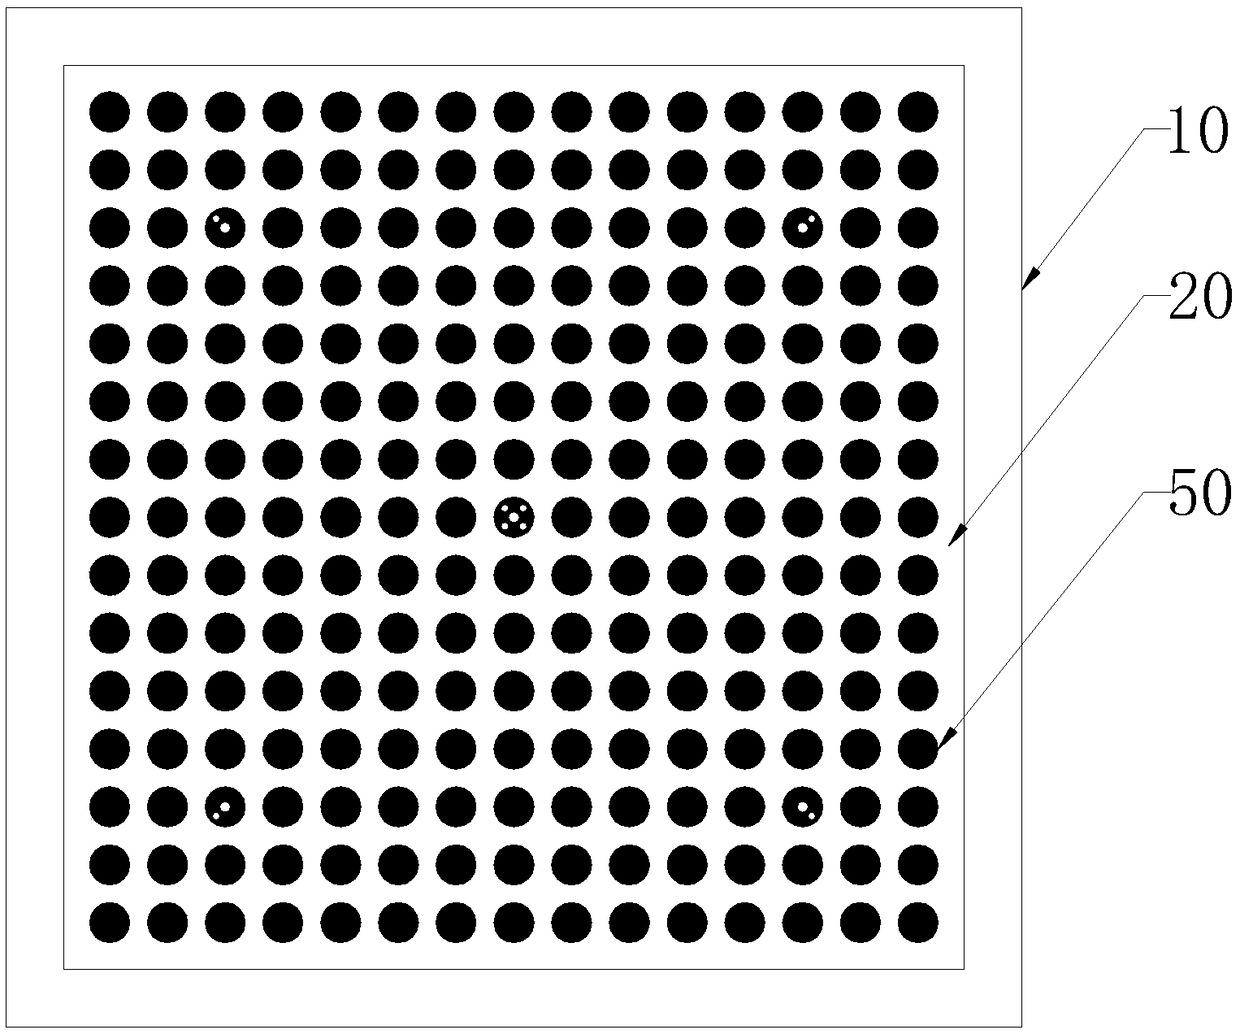 Non-checkerboard-pattern calibration plate for calibrating white light scanner